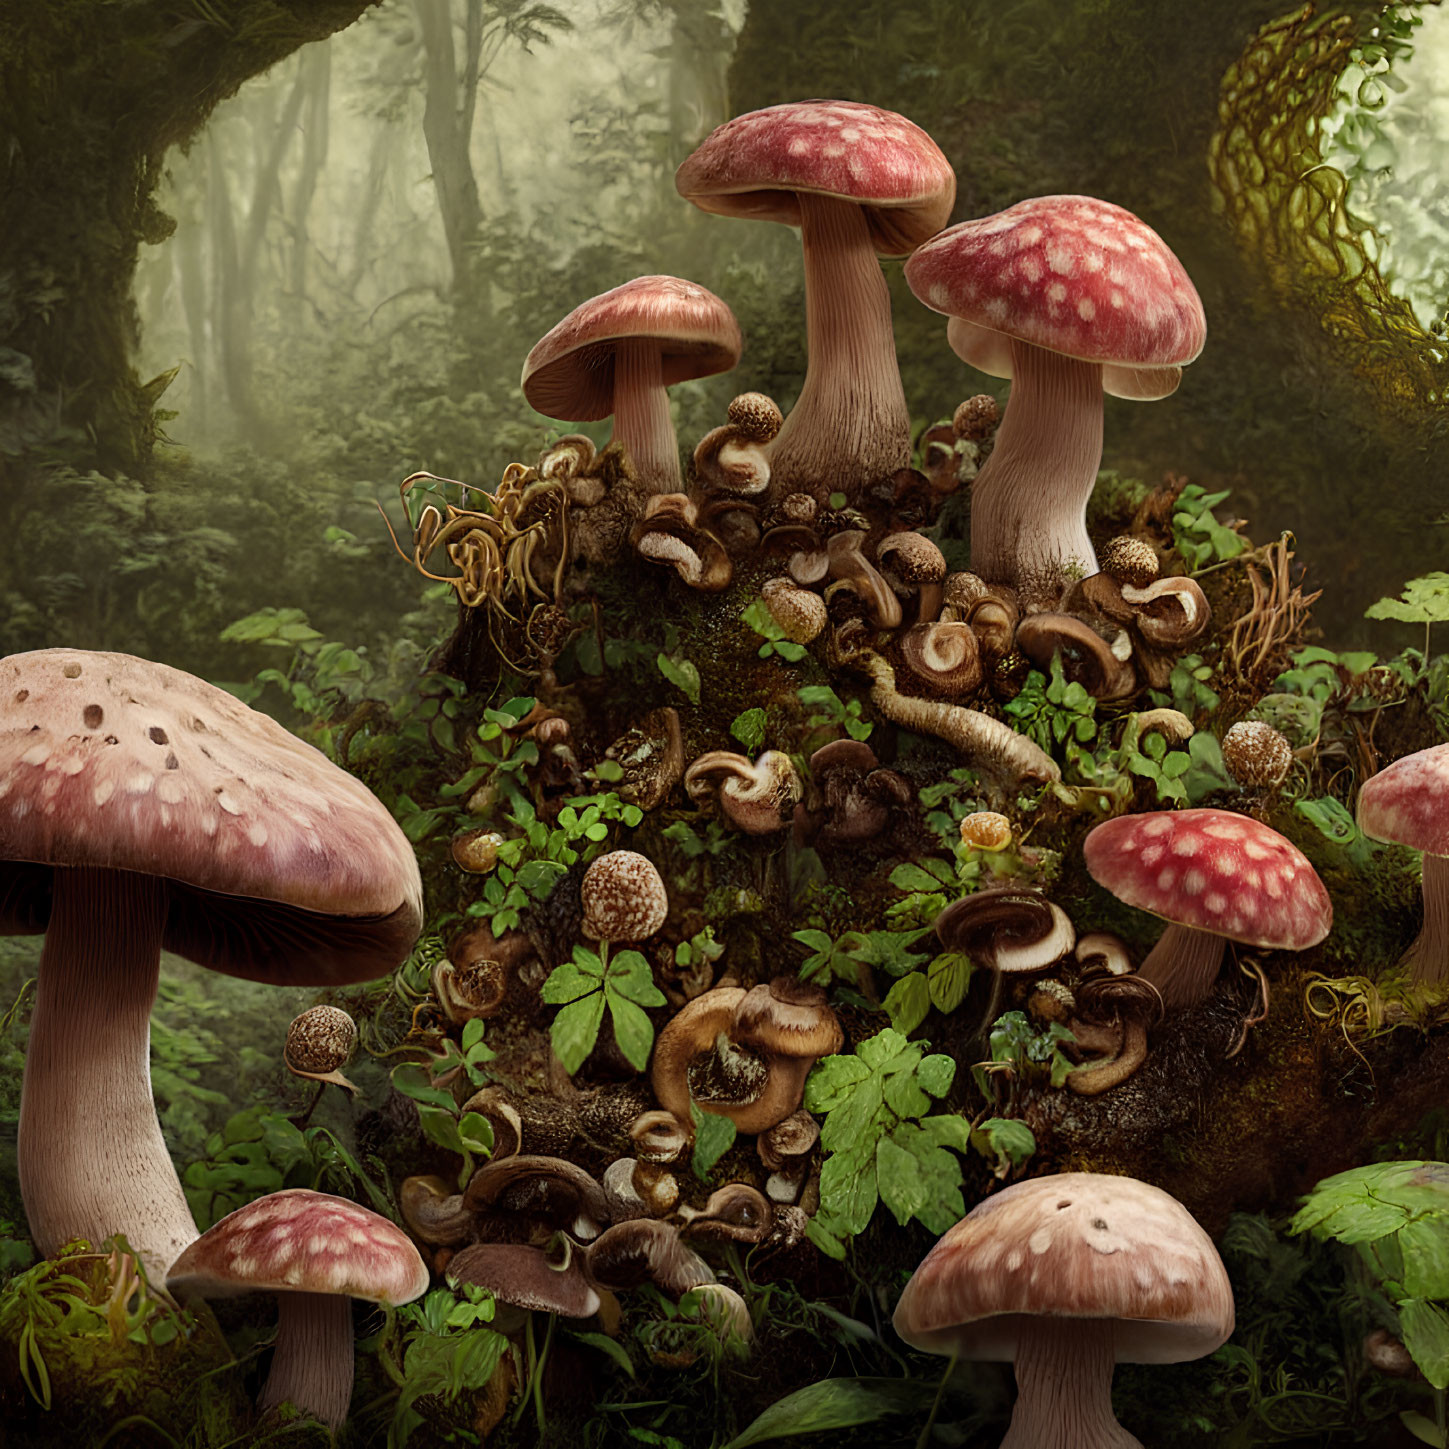 Mushrooms and fungi in misty forest setting